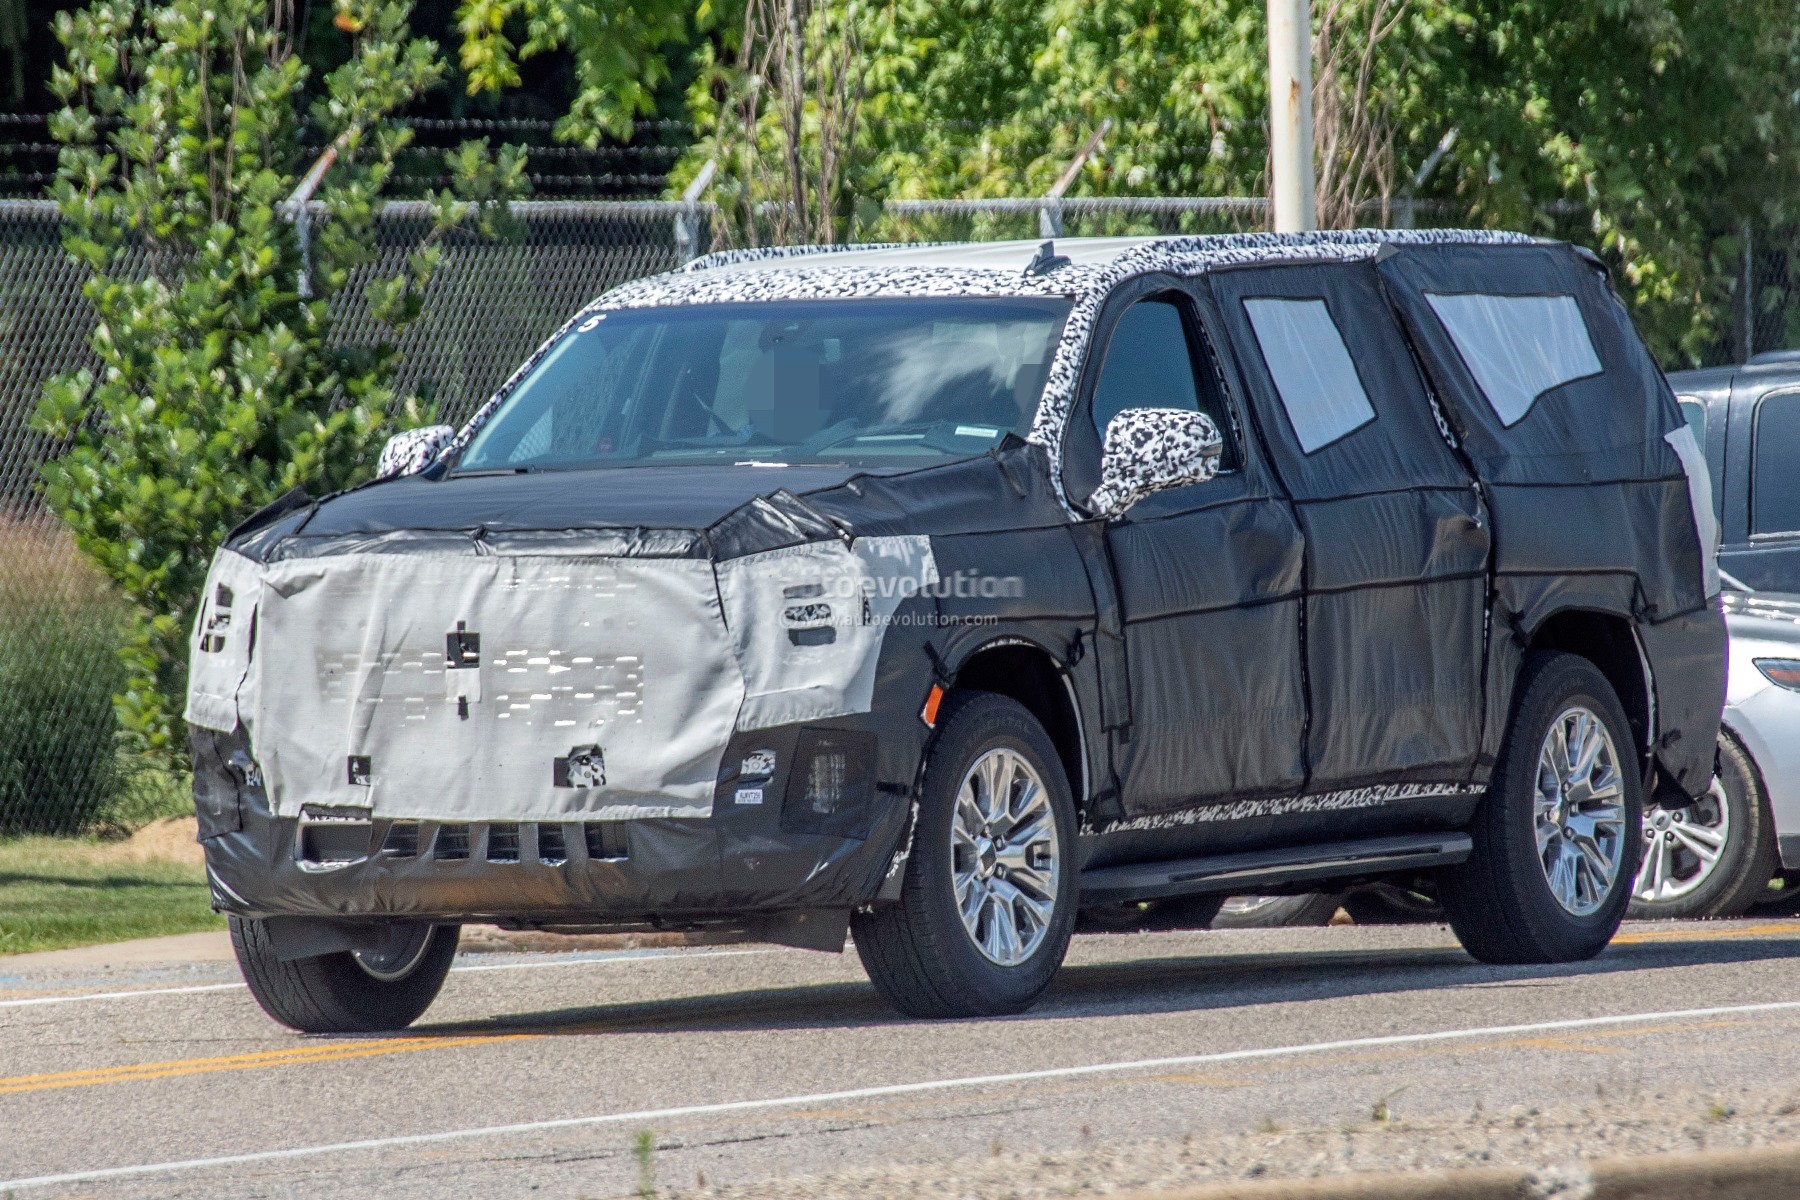 2021 Gmc Yukon Spied In Xl Denali Configuration Out In The